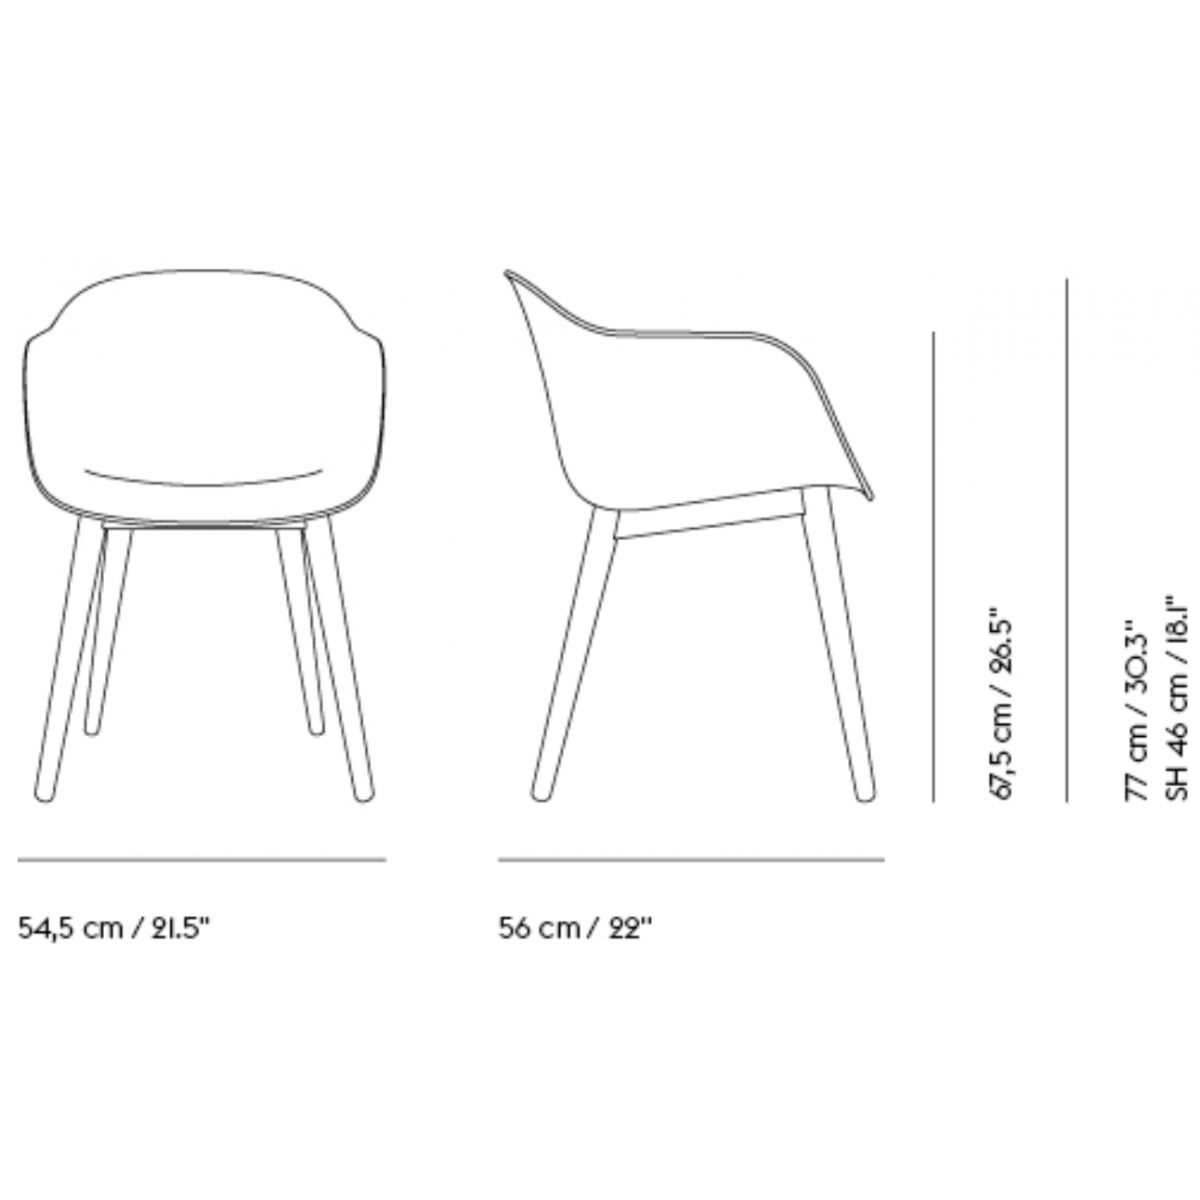 recycled plastic seat — Fiber - with armrests - plastic shell - wooden base